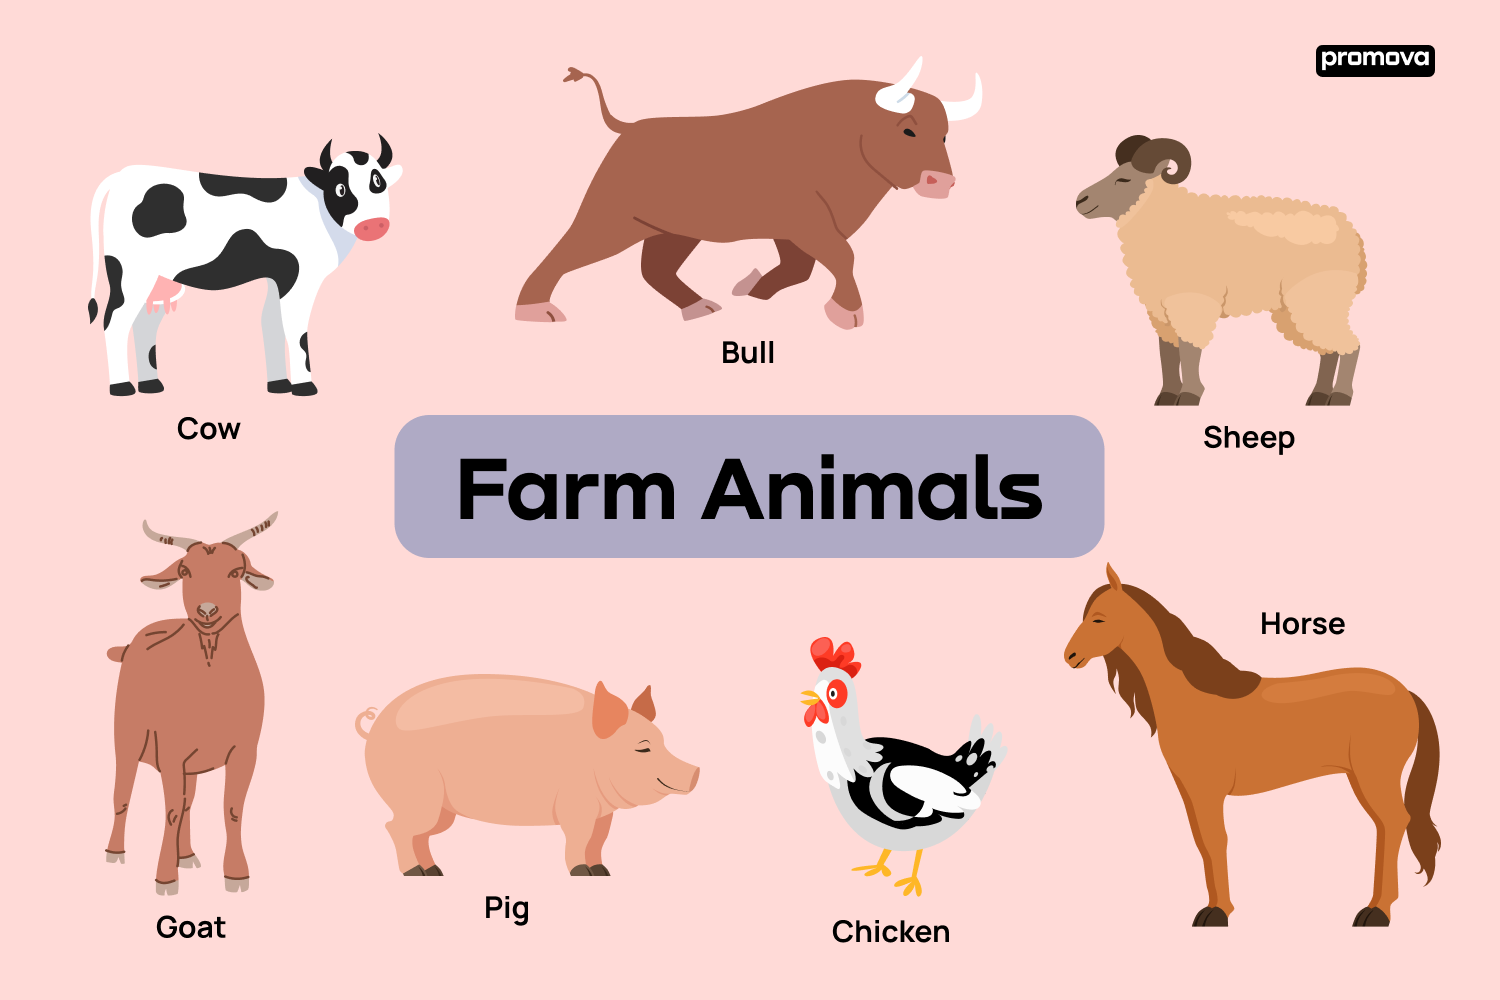 List Of Farm Animals And Their Names